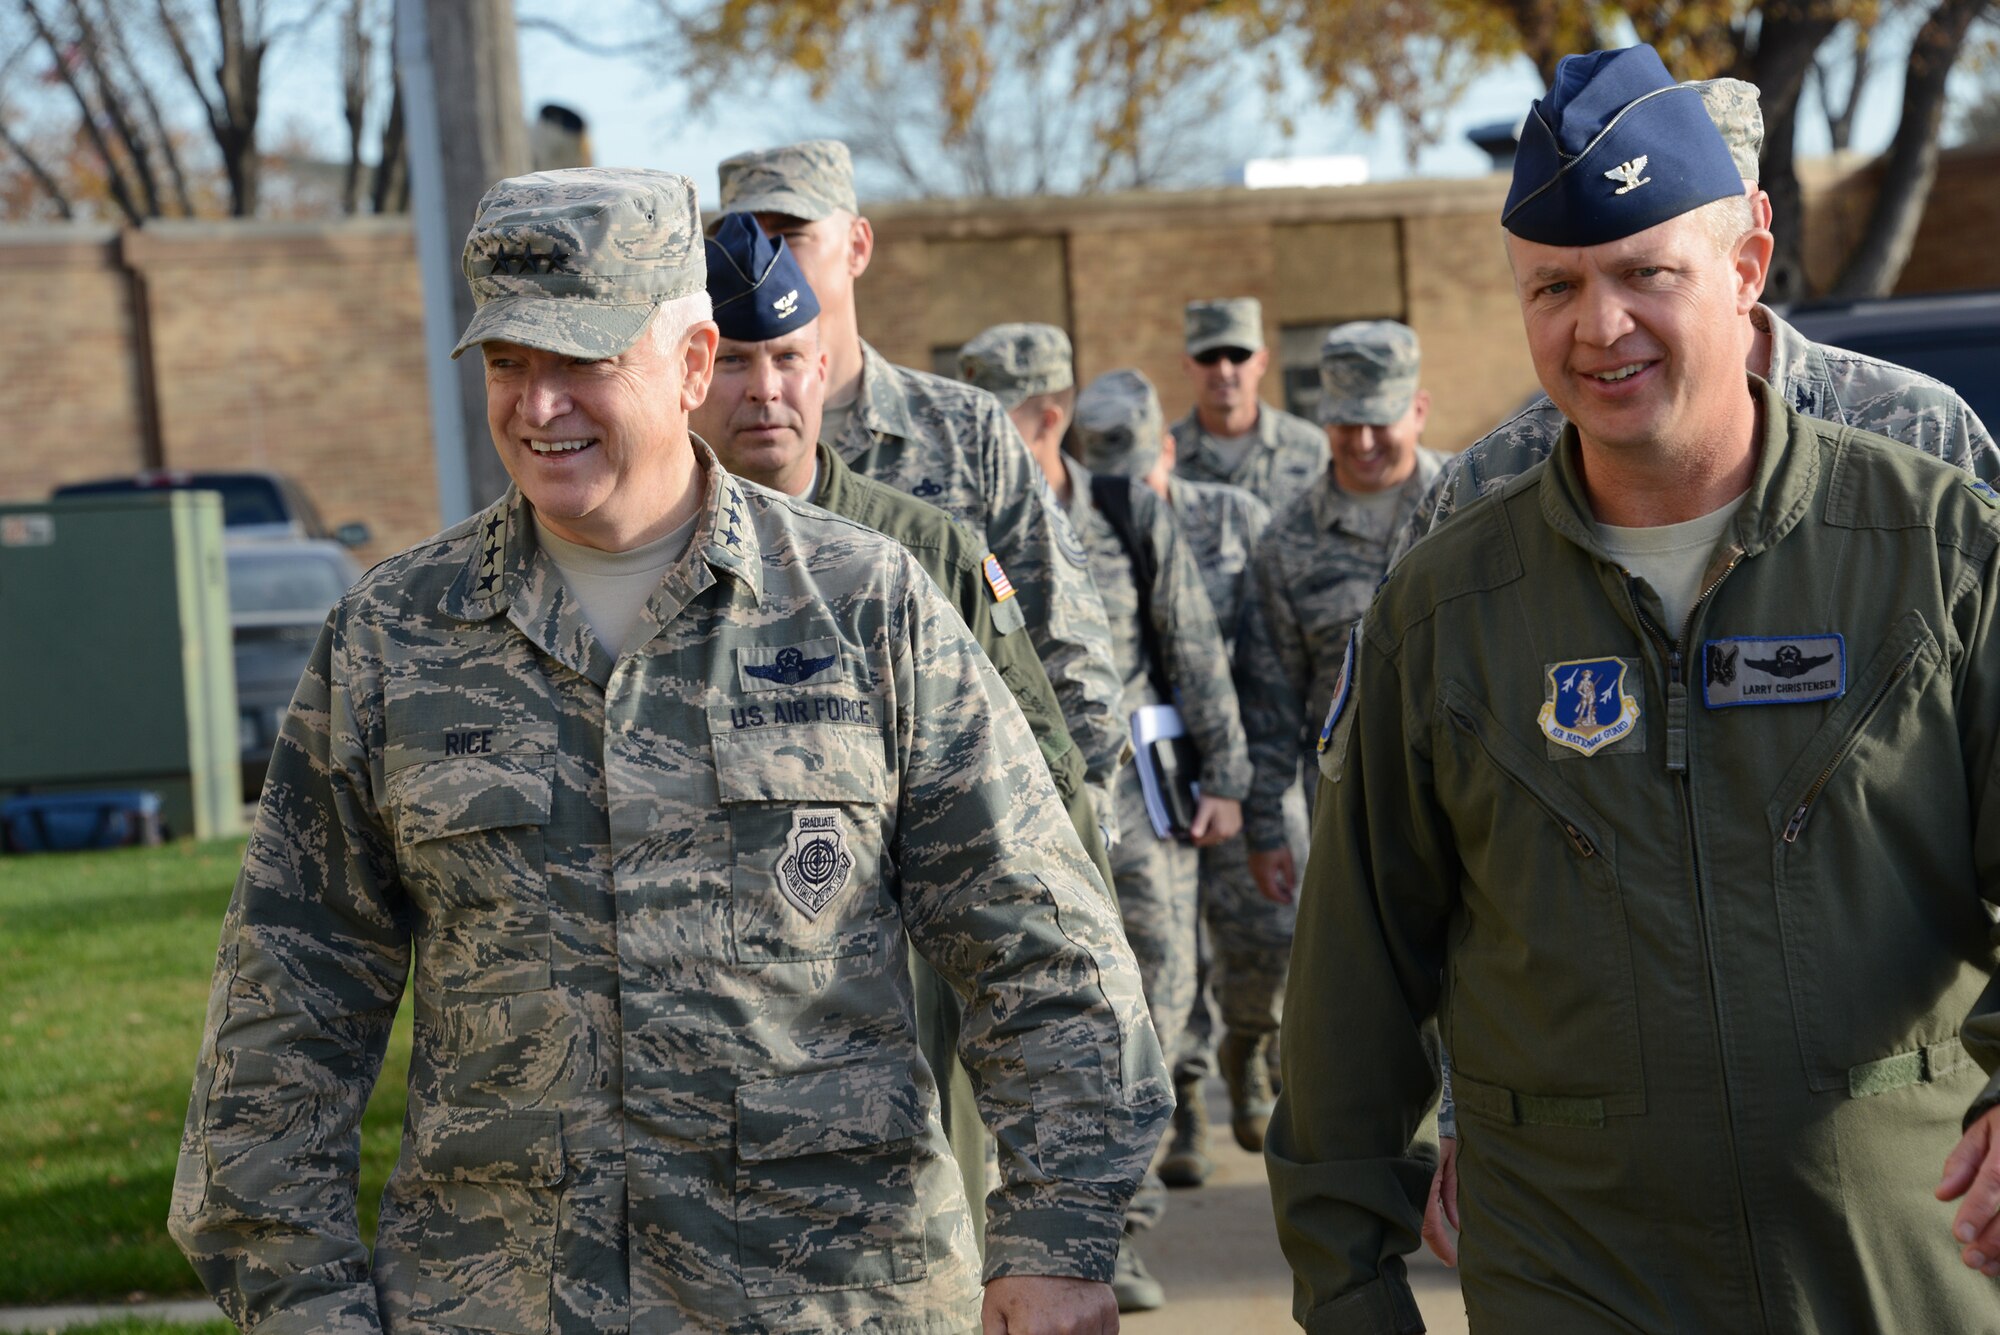 Air National Guard Director, Lt. Gen. Scott Rice, speaks with Col. Larry Christensen 185th Air Refueling Wing Commander in Sioux City, Iowa while touring the Air National Guard base in Sioux City on November 5, 2016. This is the first time in the unit’s history a sitting director of the Air Guard has visited the Air Refueling Wing located on Iowa’s western boundary.
U.S. Air National Guard photo by Master Sgt. Vincent De Groot 185 ARW PA